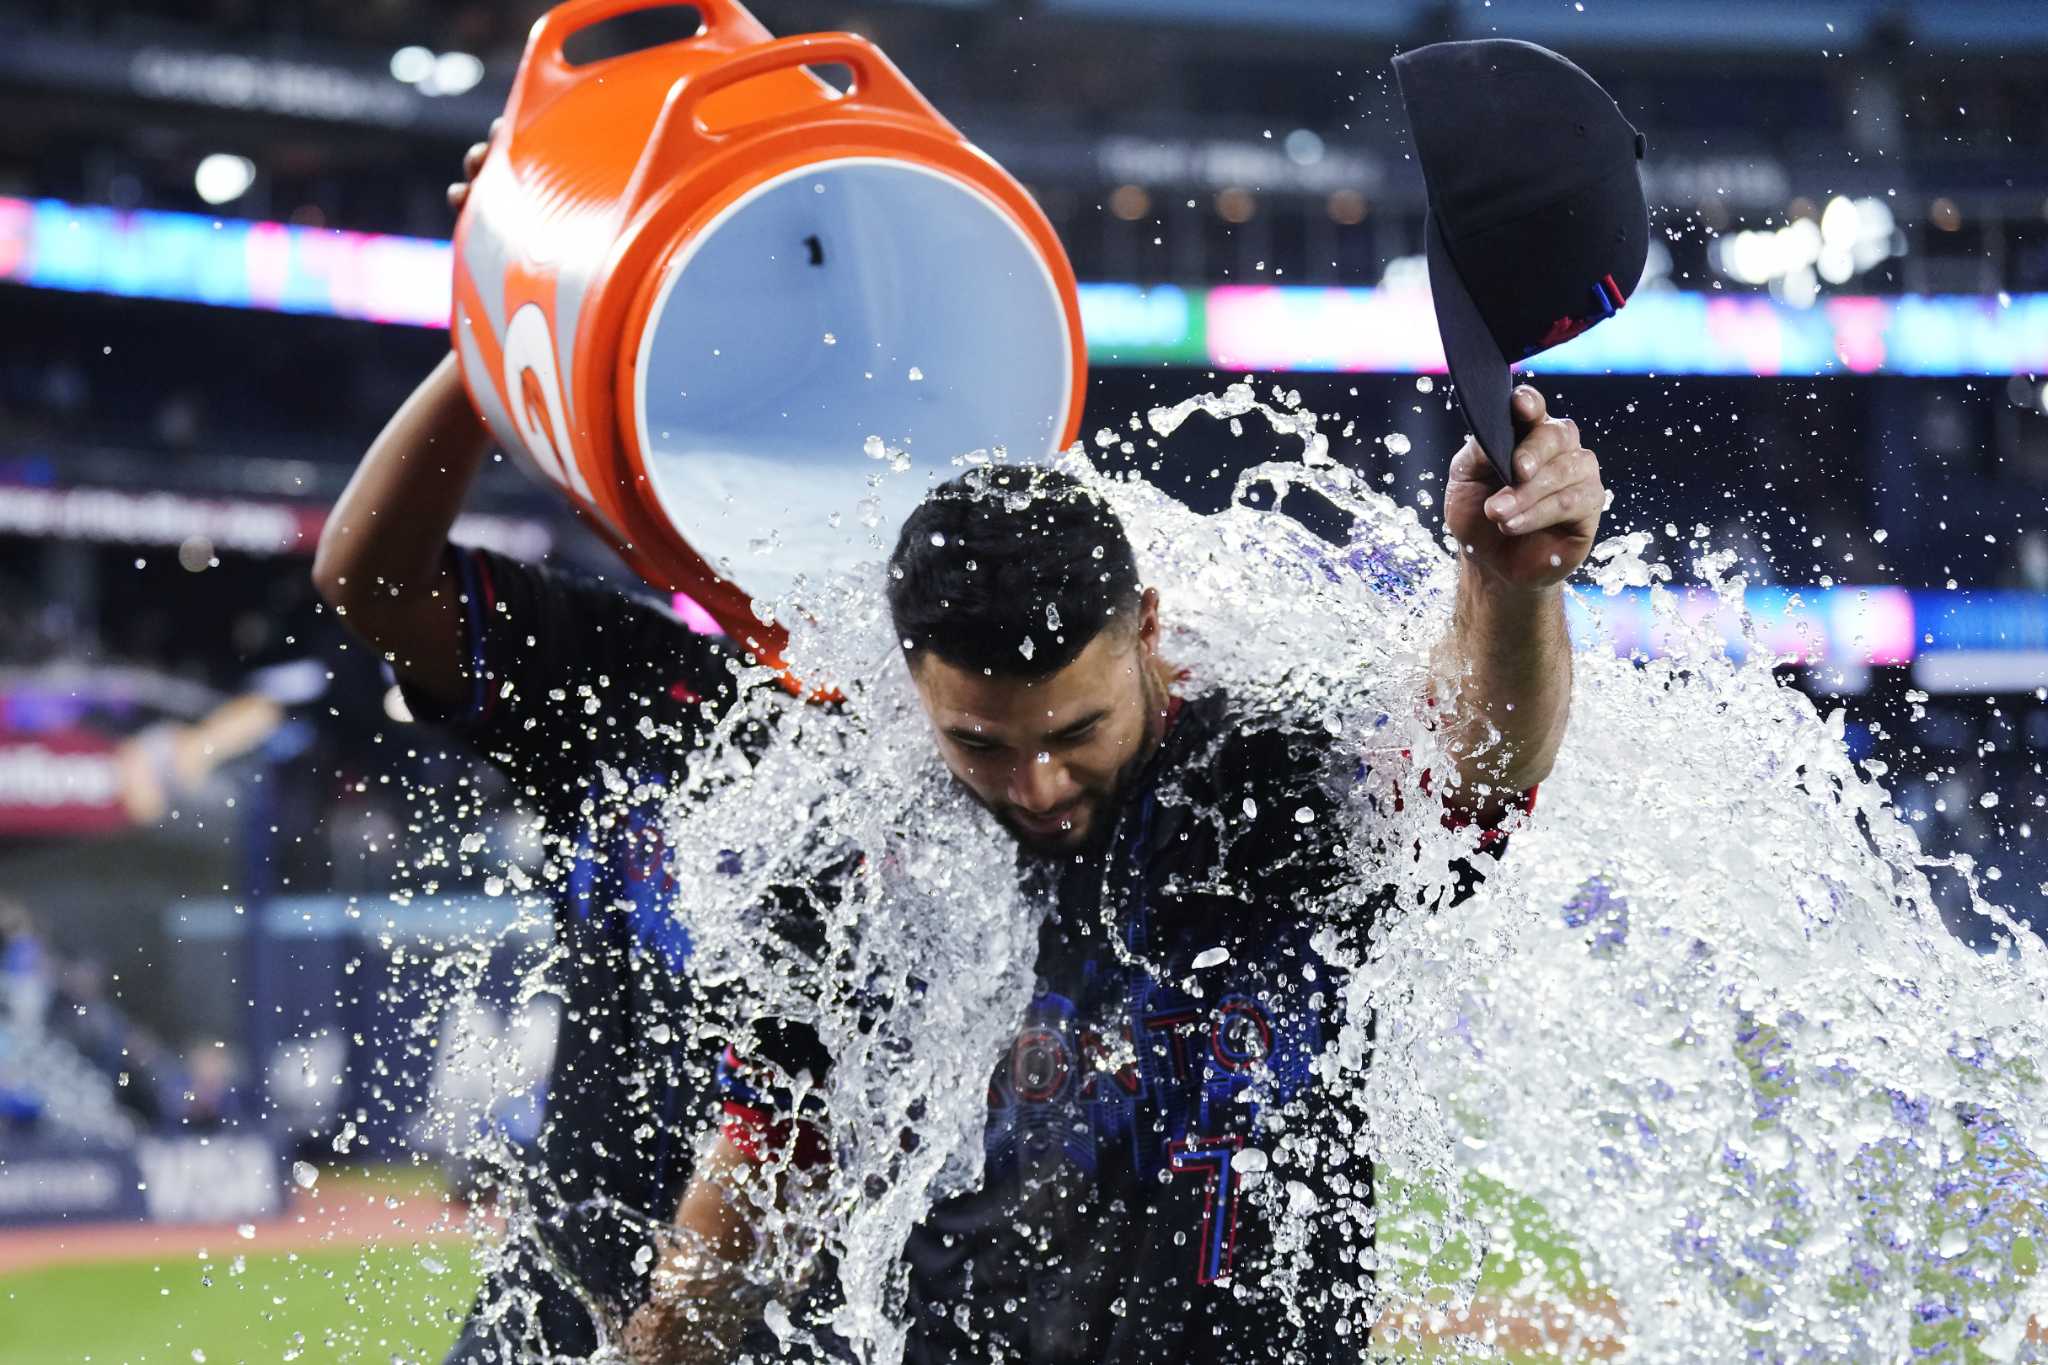 Kiner-Falefa has winning hit in 9th inning and Blue Jays beat Orioles 3-2